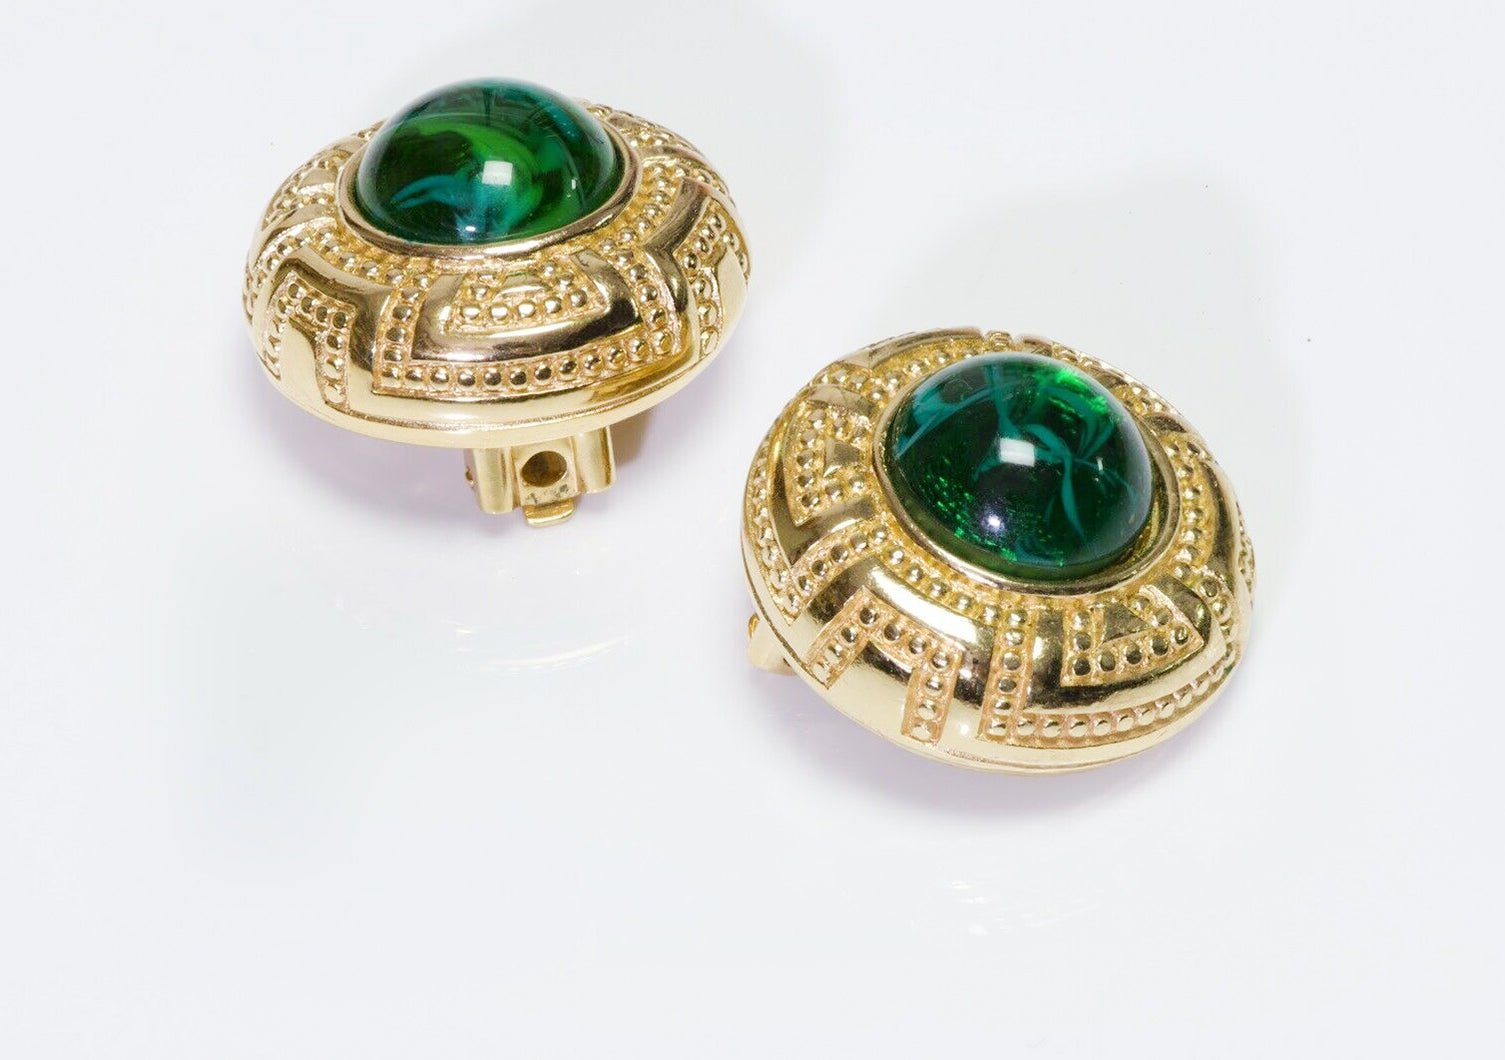 Vintage Christian DIOR Textured Green Cabochon Glass Earrings